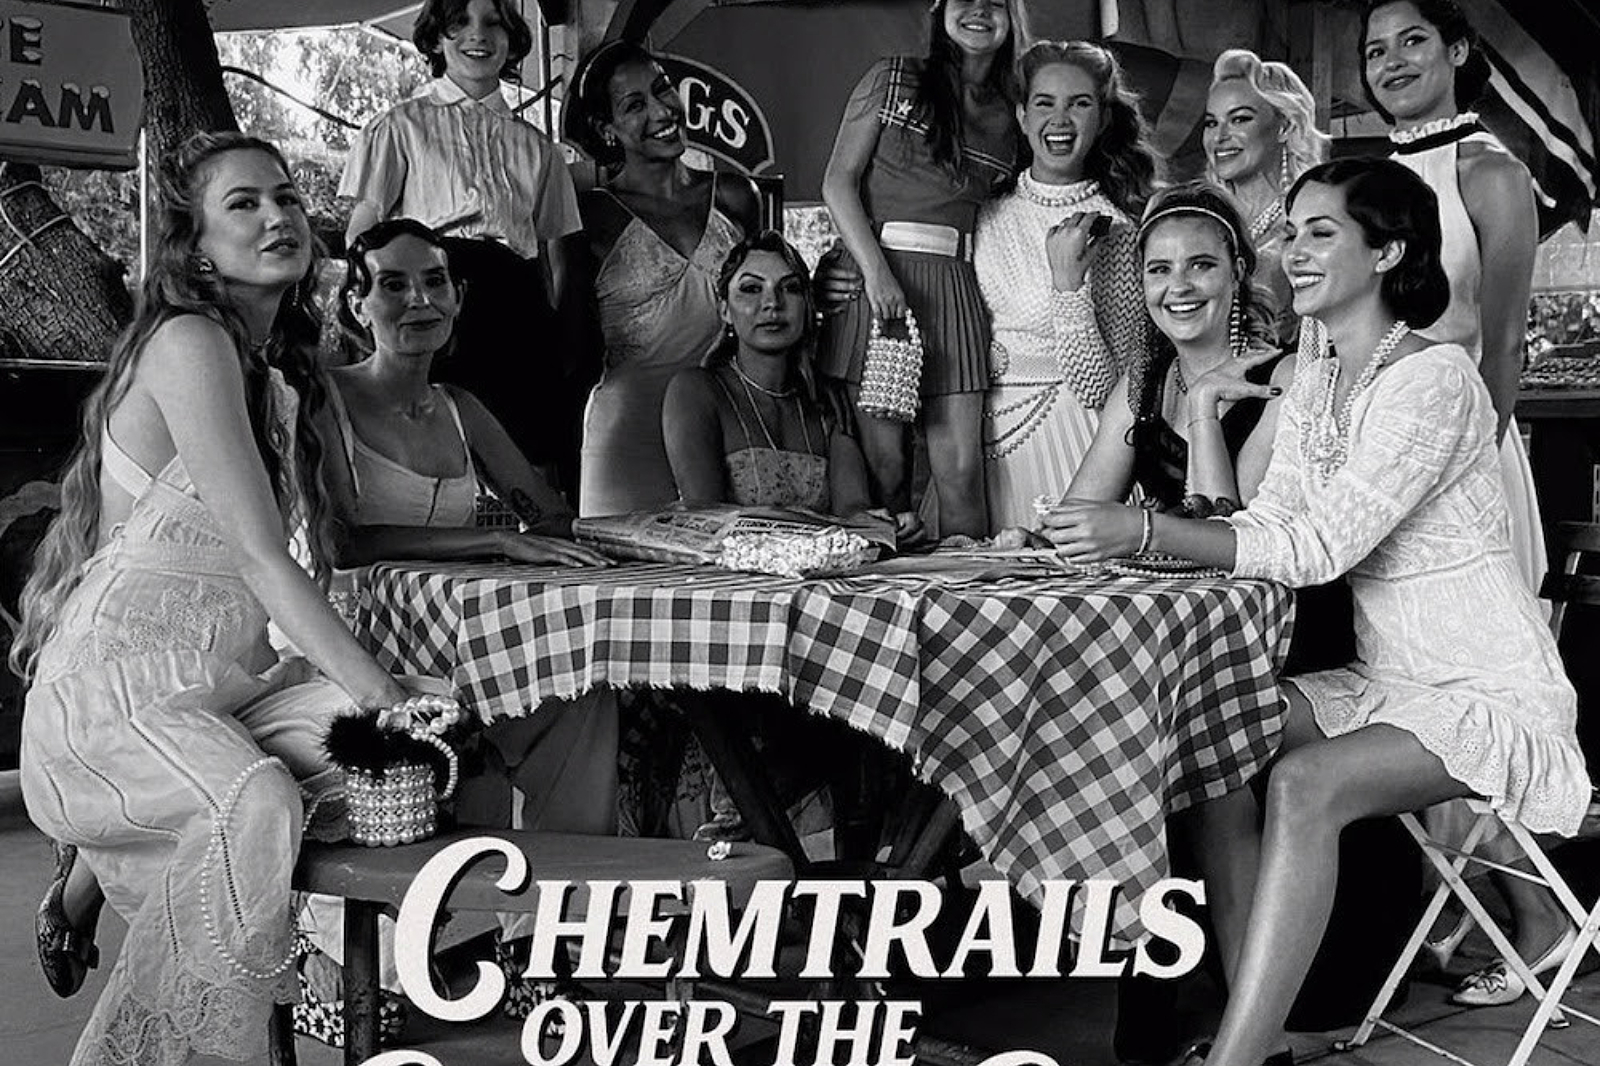 Lana Del Rey - Chemtrails Over the Country Club